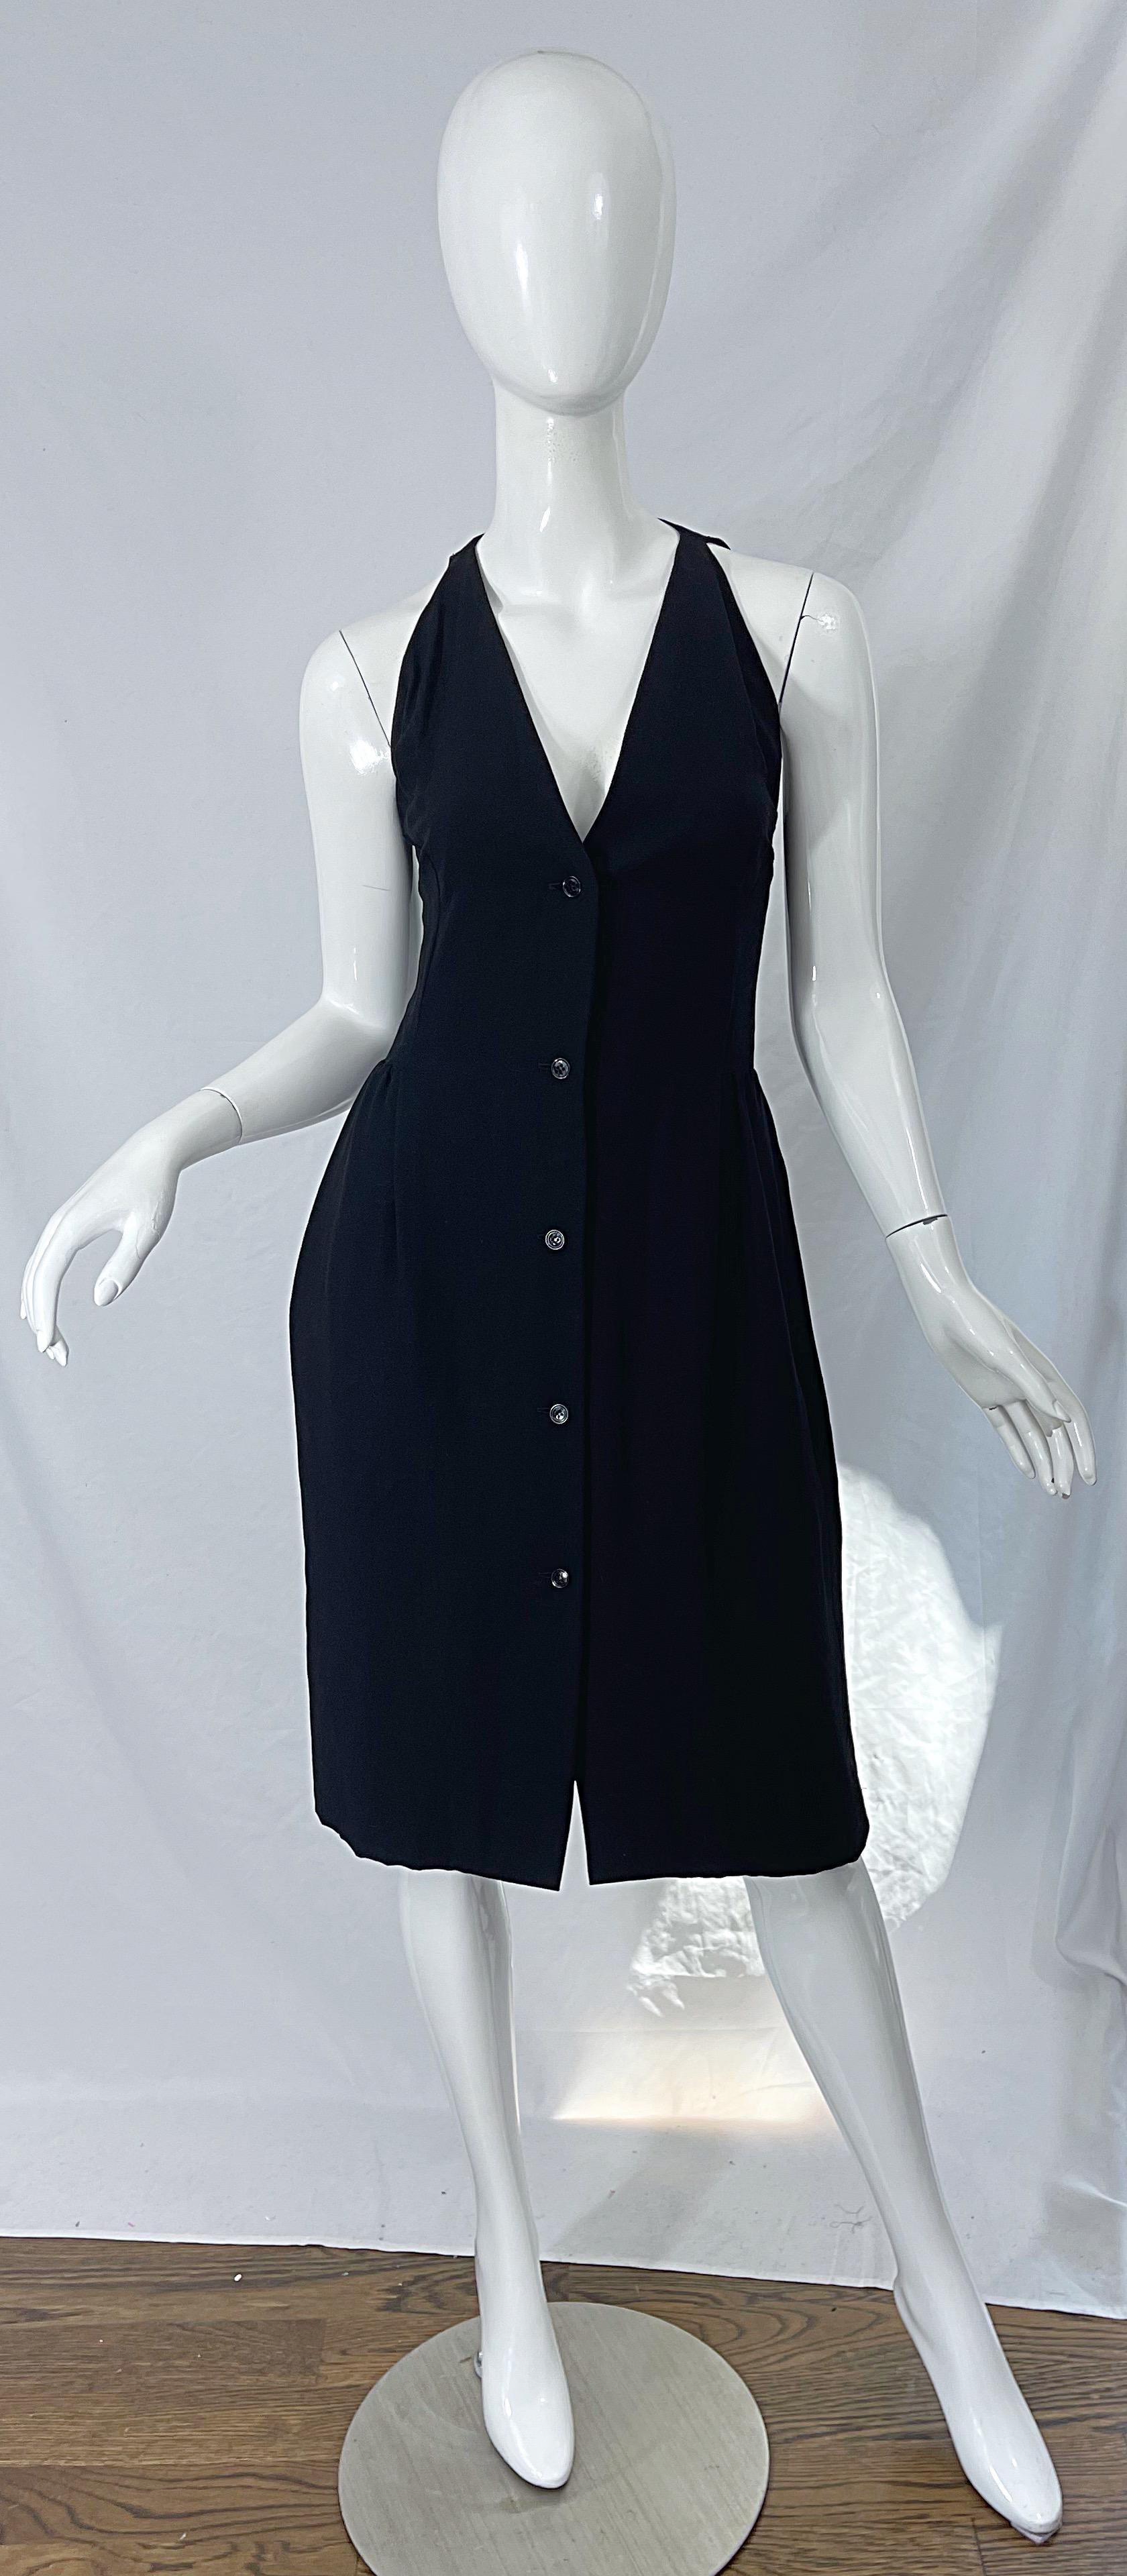 The perfect HALSTON 1970s little black dress ! I just love the lines on this beauty. While it looks like a halter dress from the front, it is not a halter dress. Buttons up the front with hidden snap details between each button. POCKETS at each side